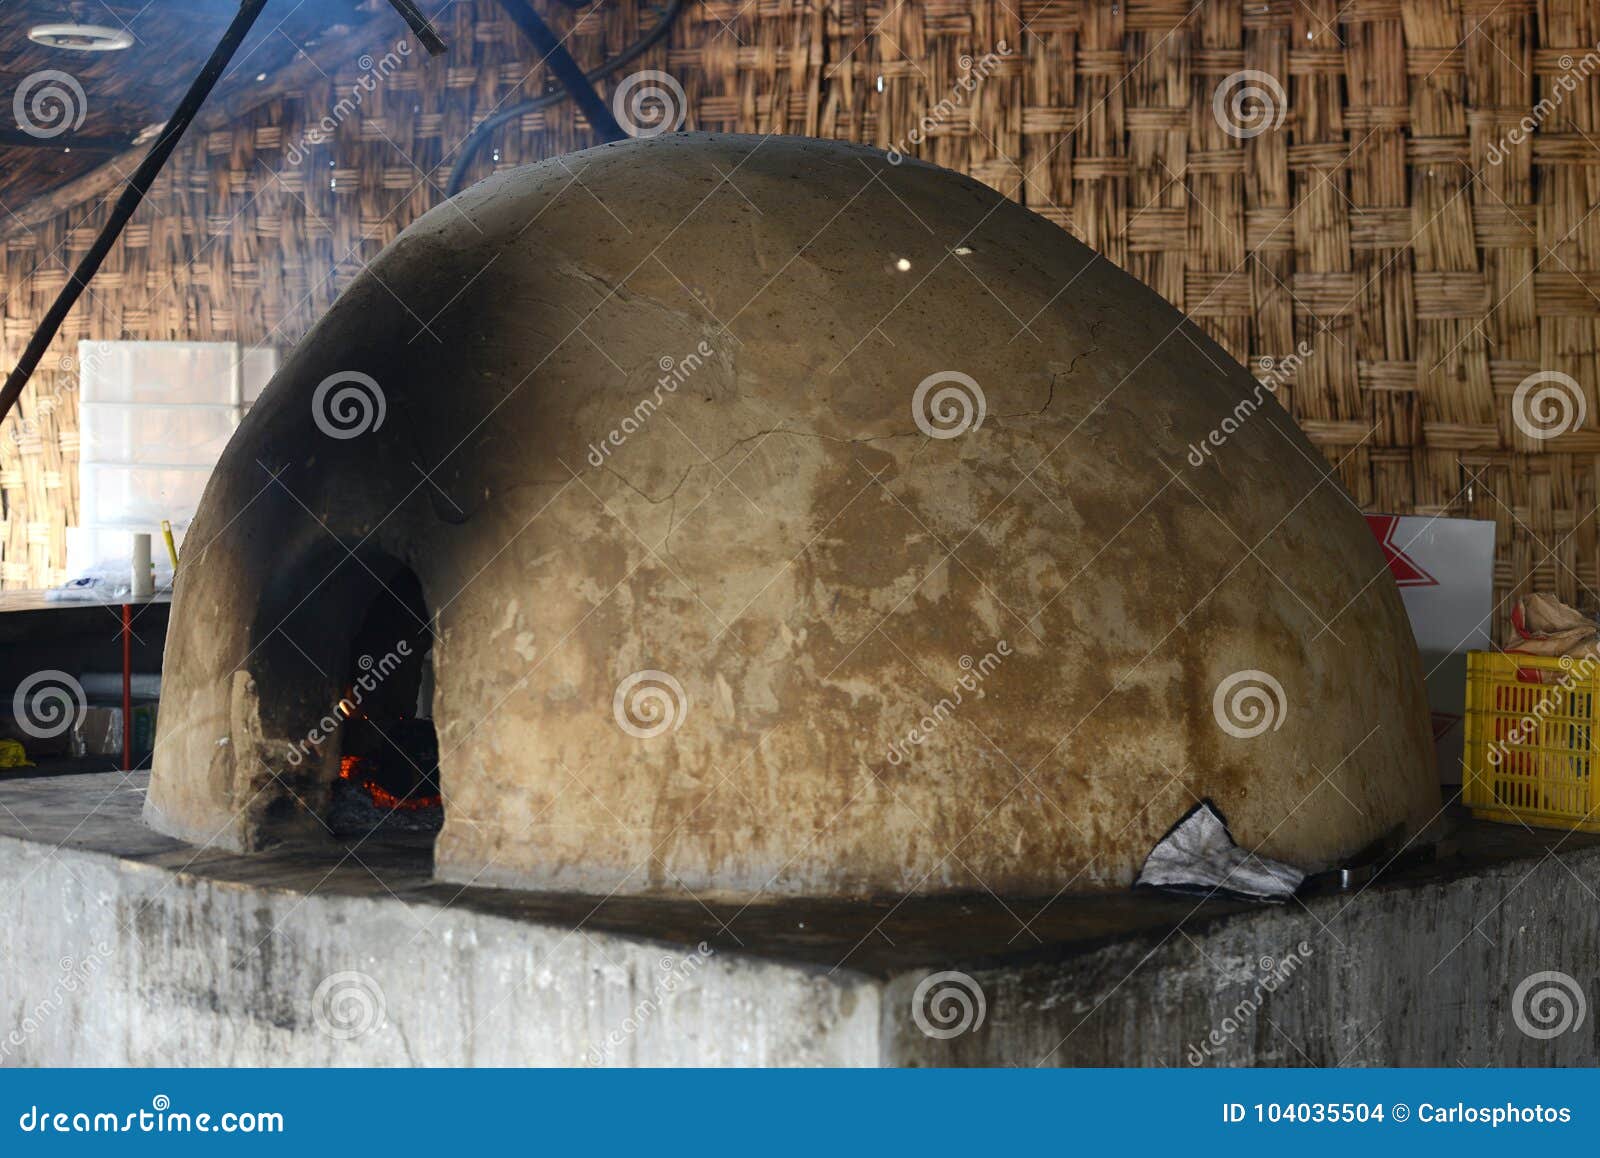 Clay oven stock image. Image of peru, bakery, stone, places - 5985631